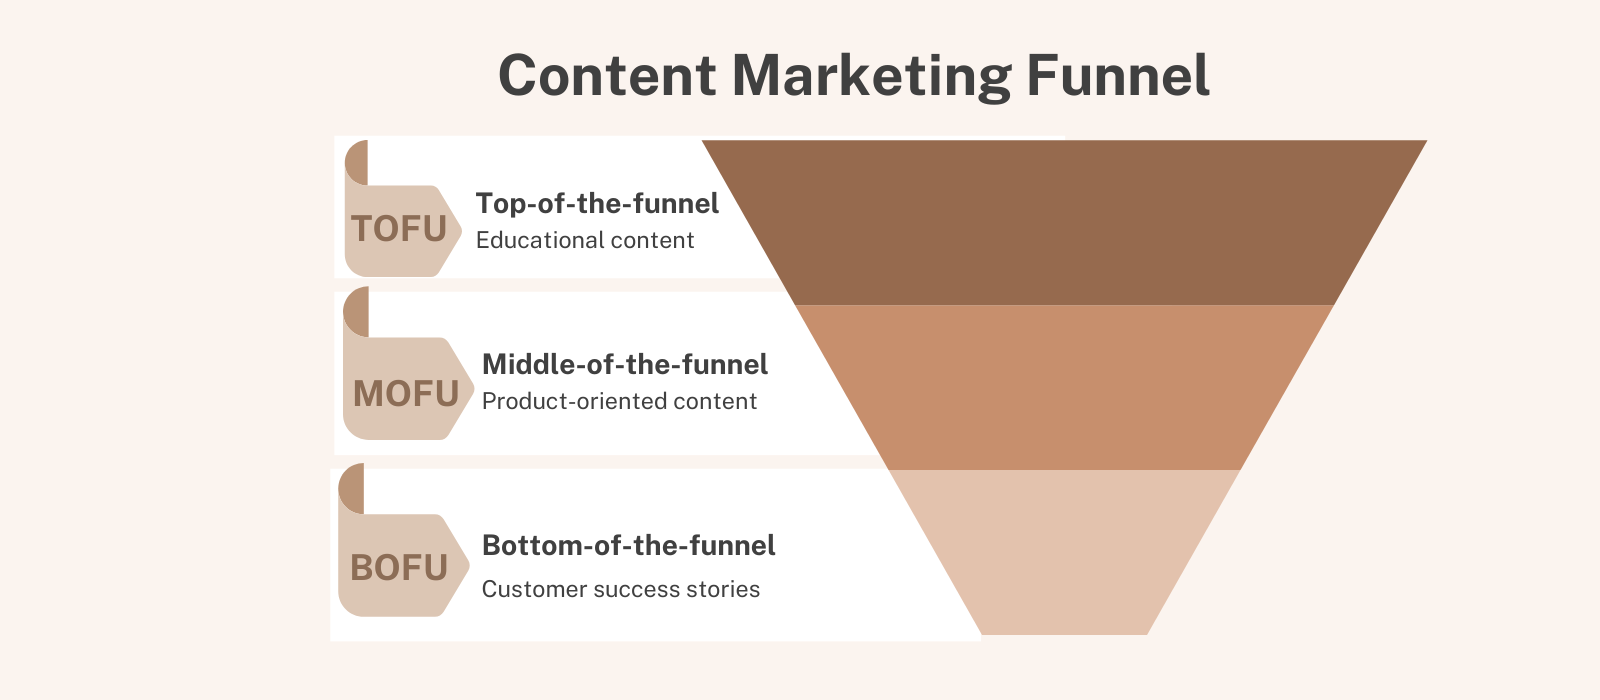 An infographic of the content marketing funnel